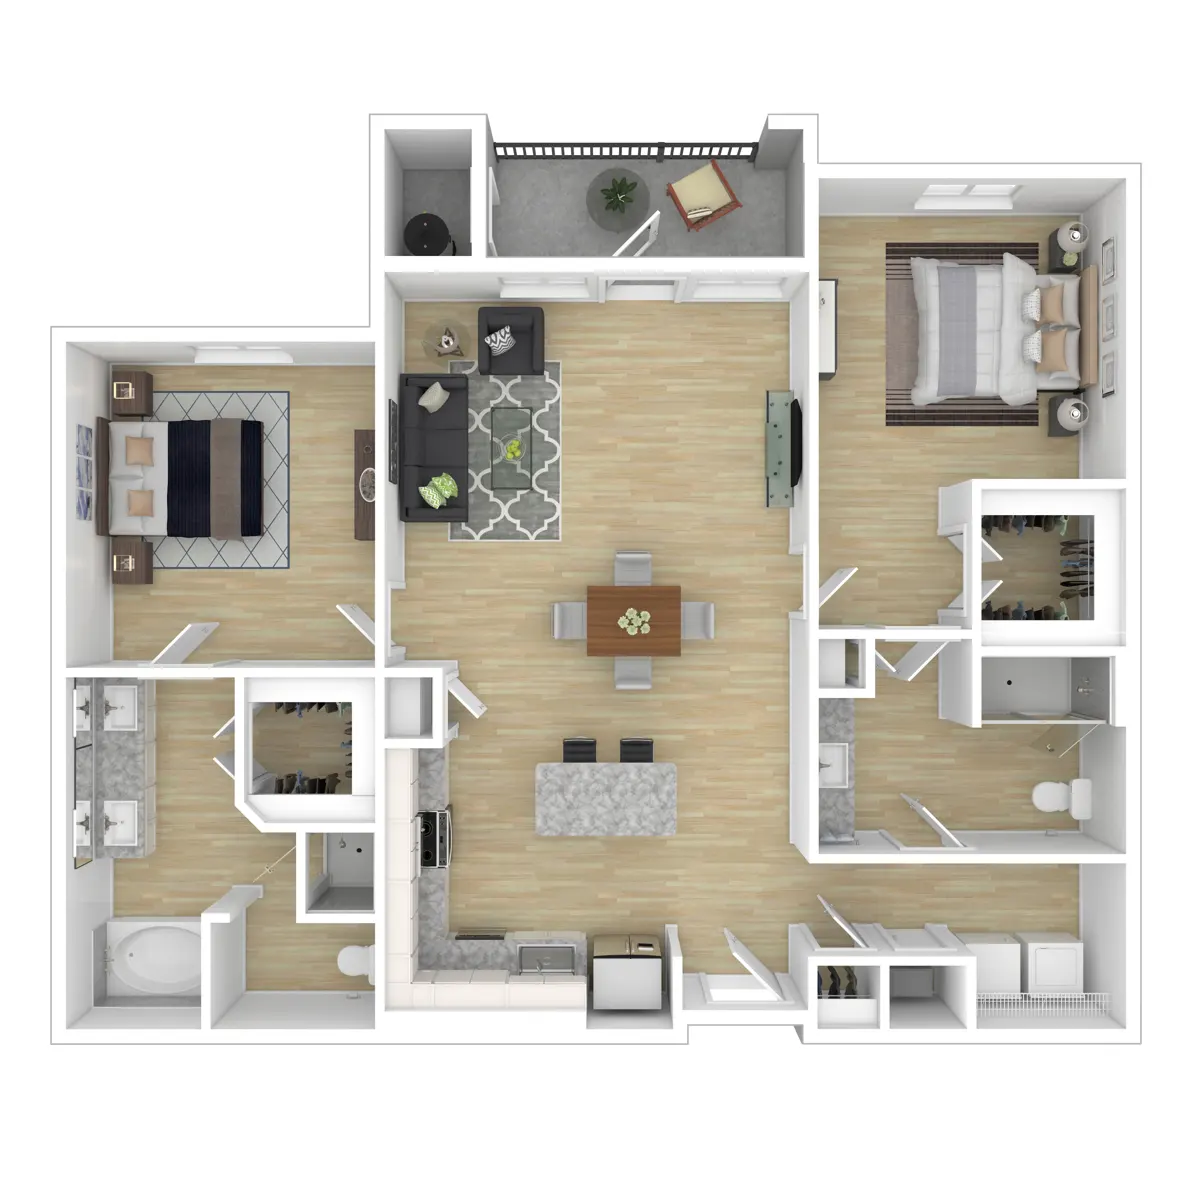 The Verge at Summer Park Rise apartments Houston Floor plan 8